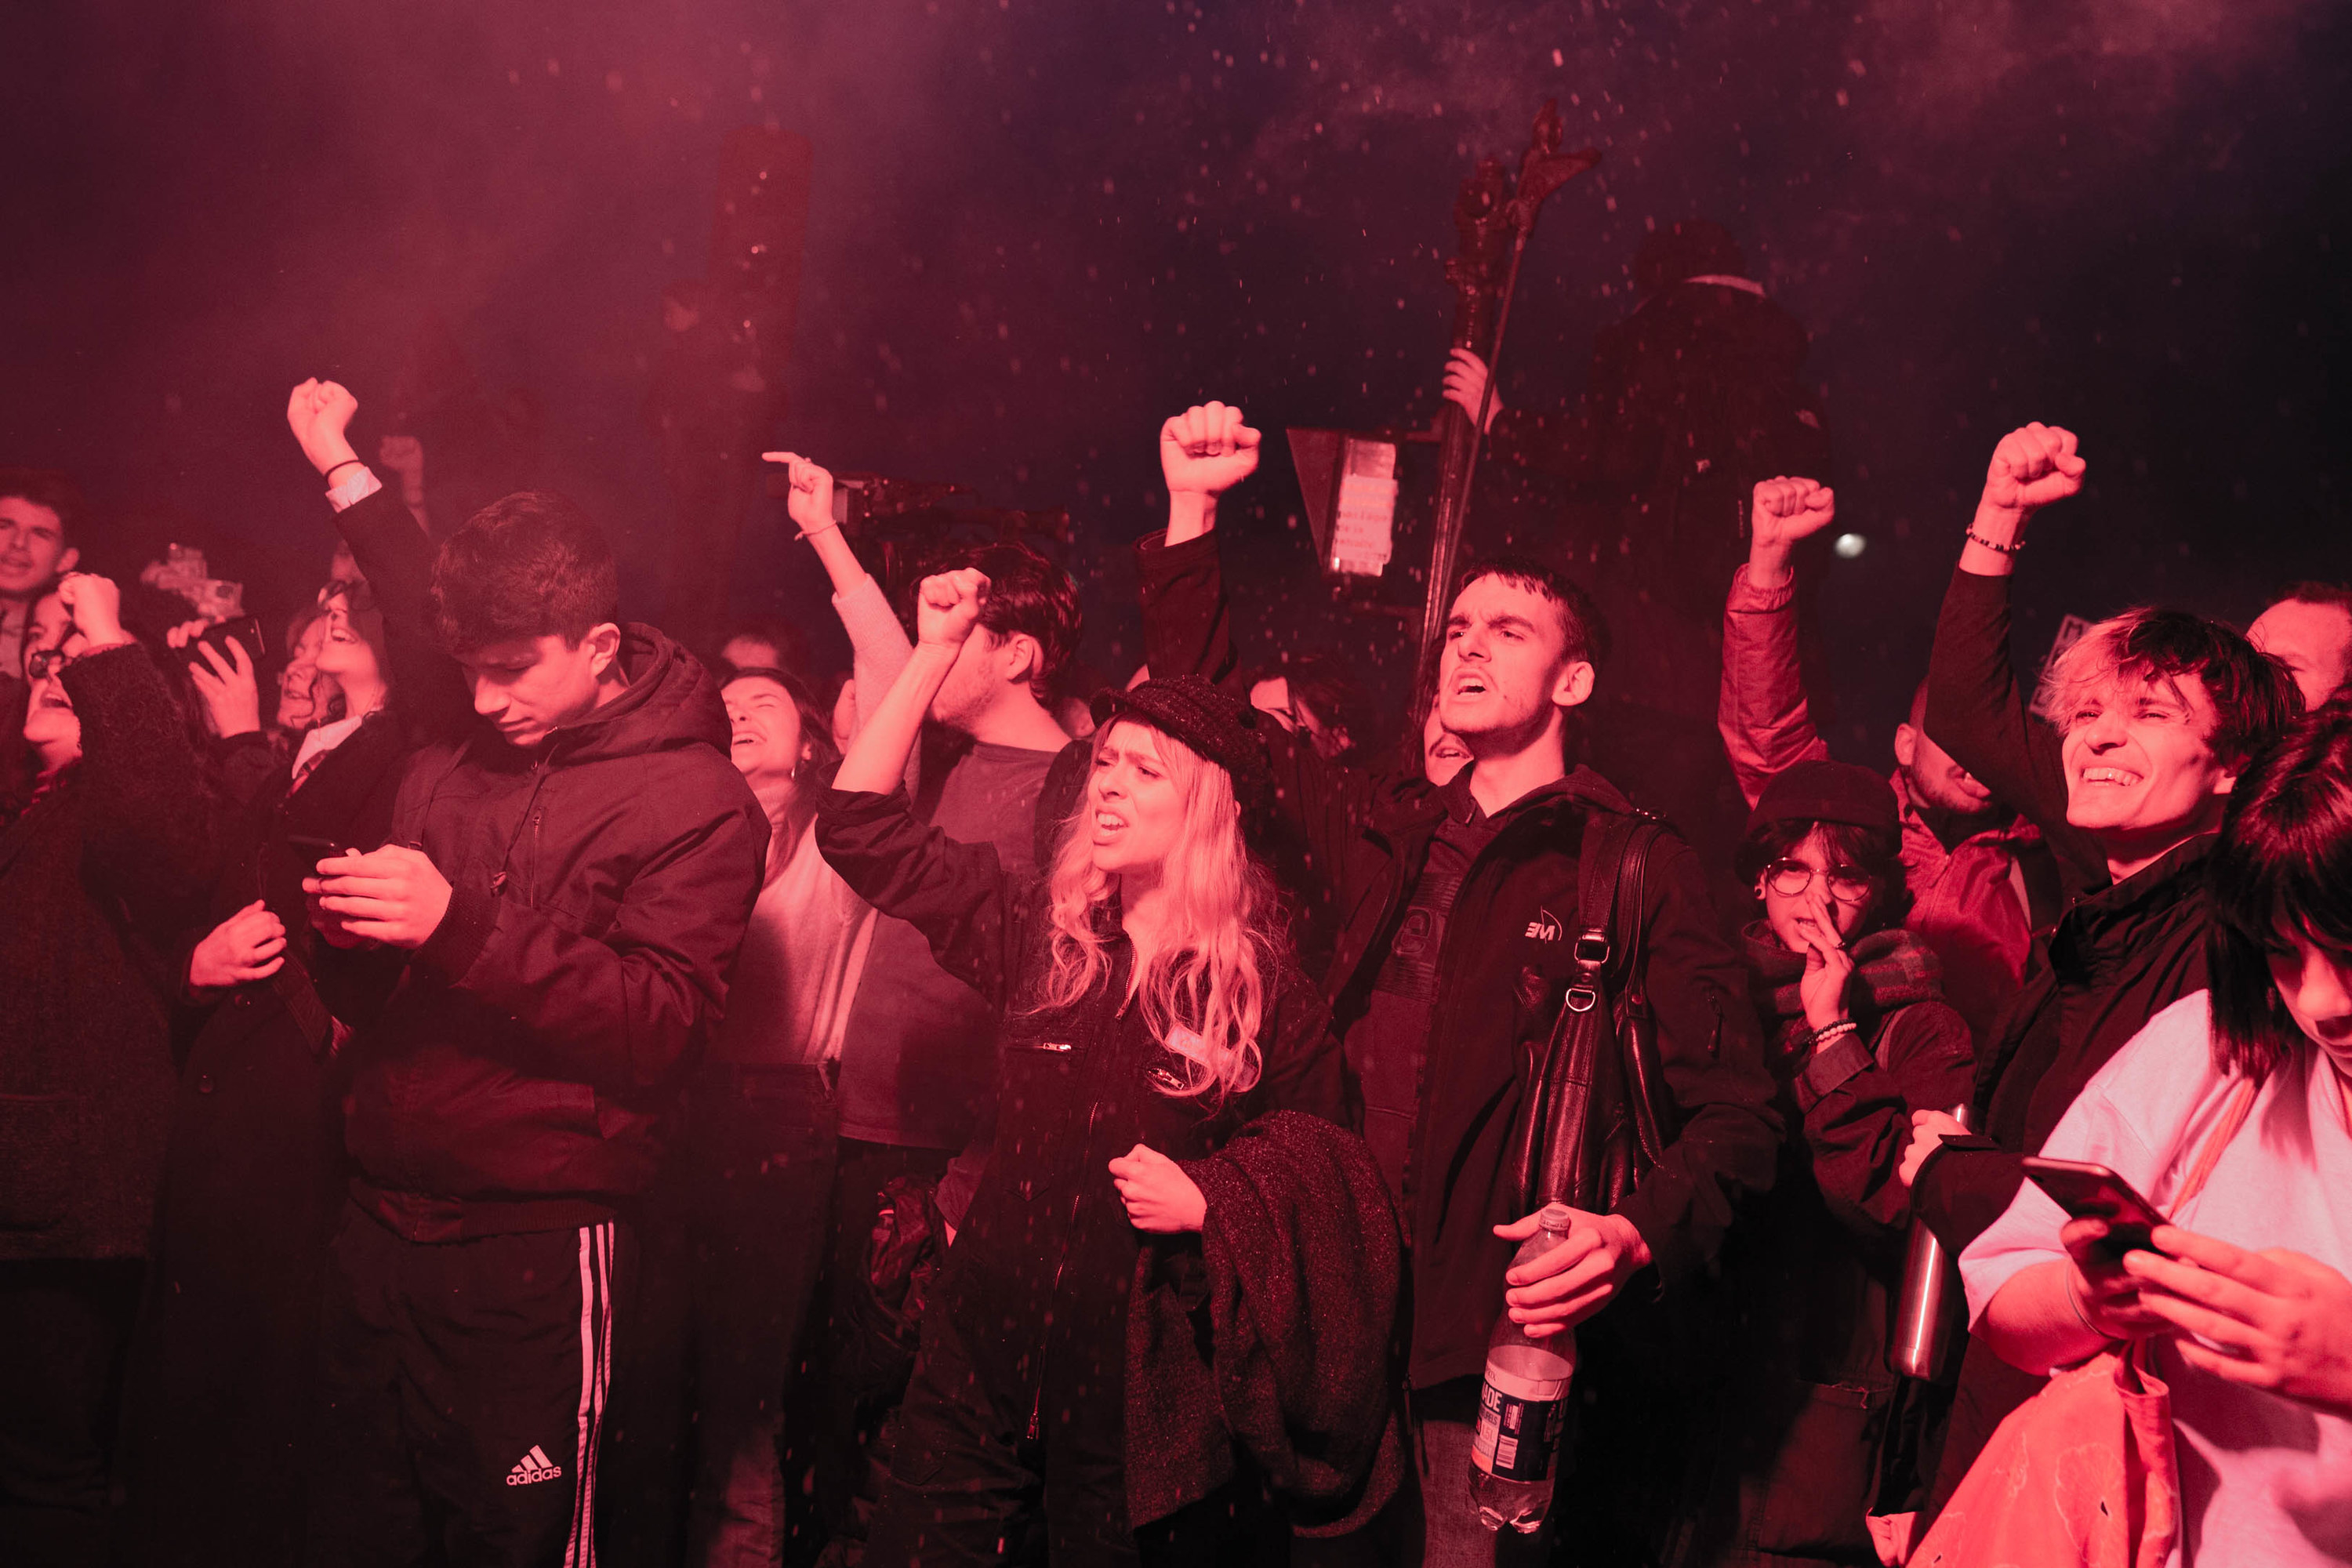 a group at night raises their arms and chants are illuminated by a flare